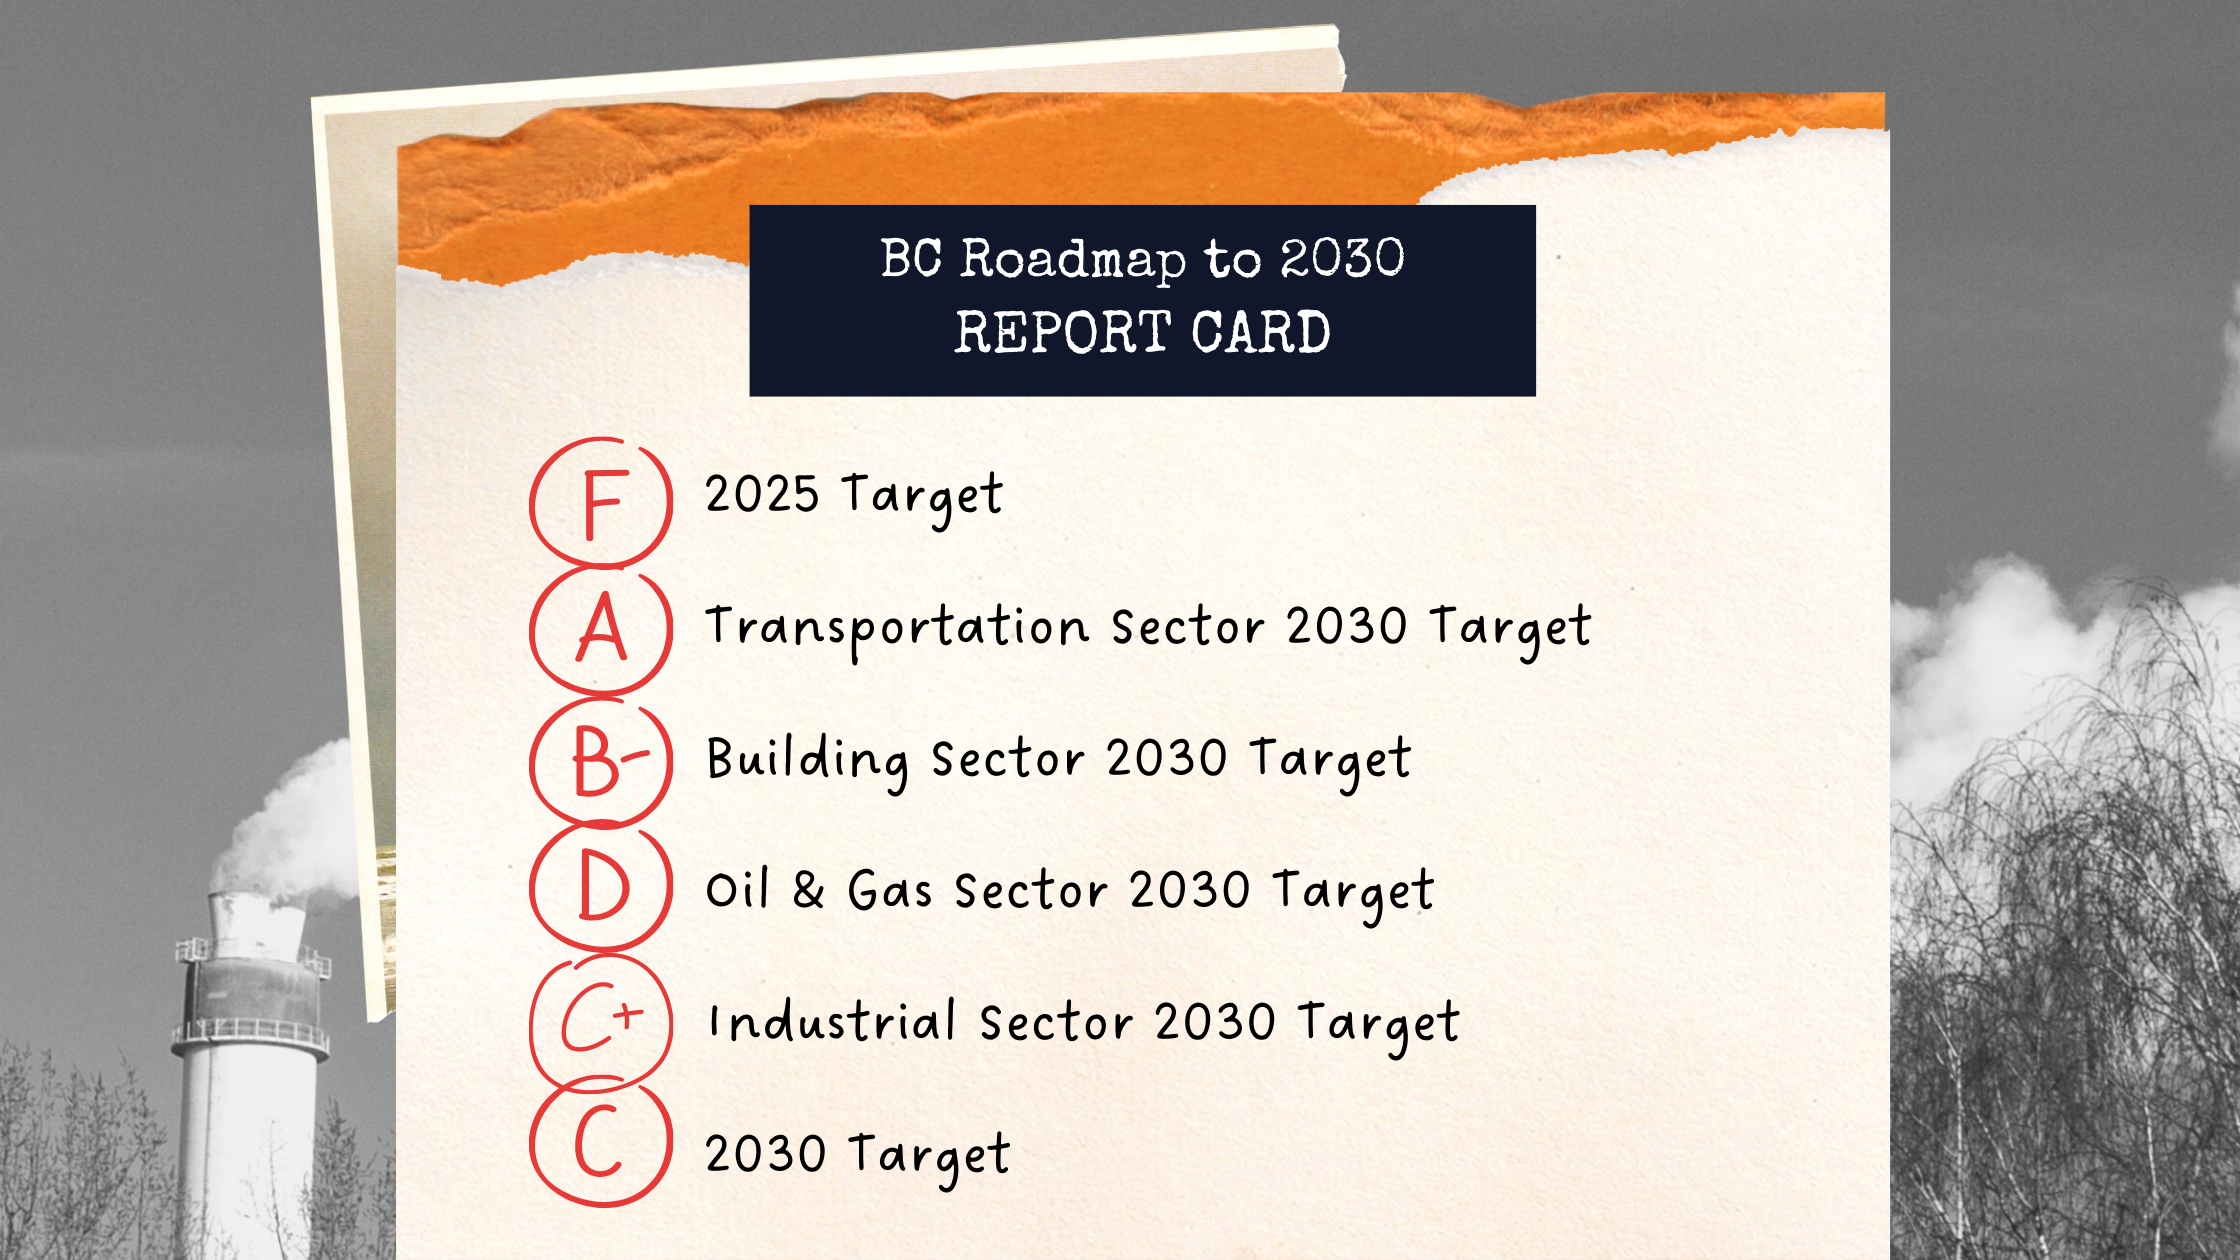 Photo of report card grading BC's Roadmap to 2030 Climate Plan